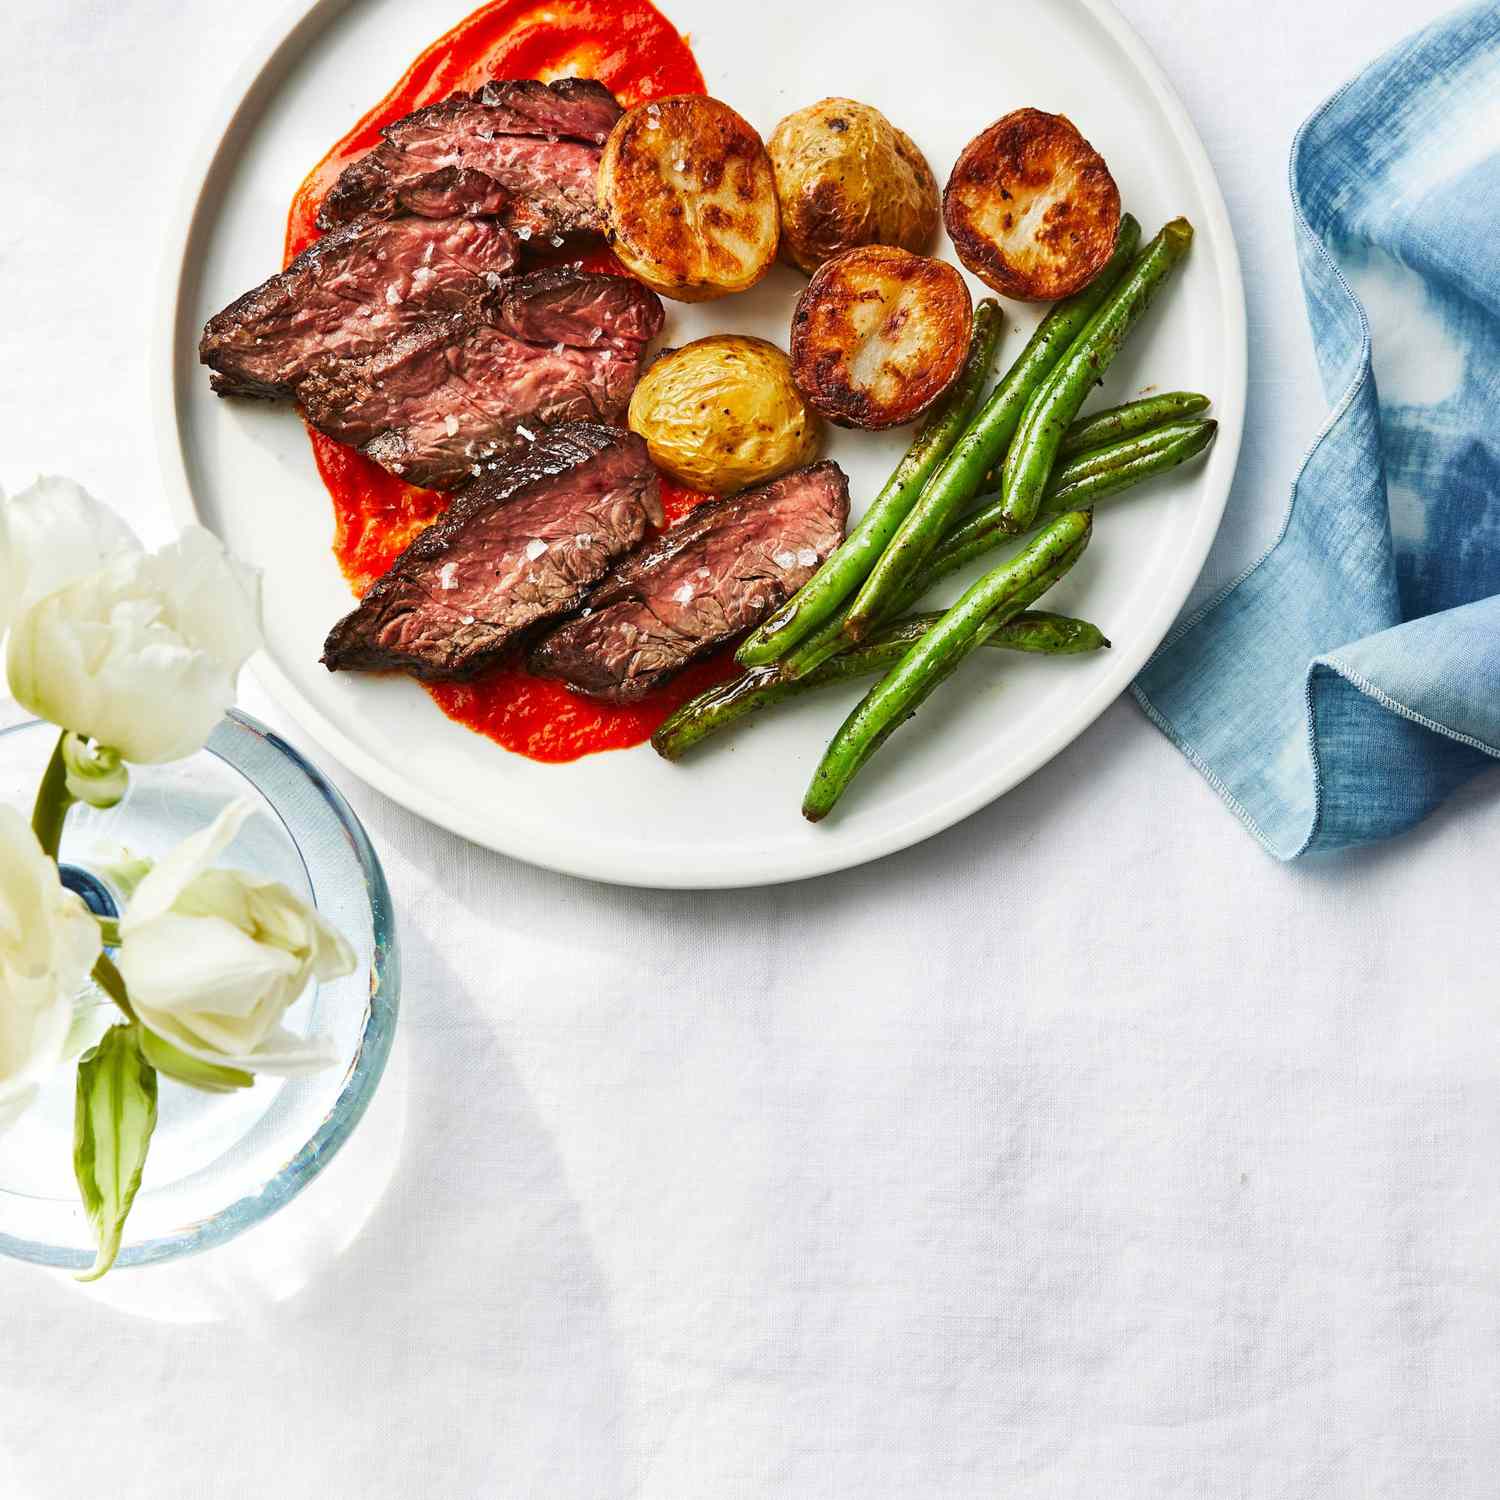 Hanger Steak with Roasted Red Pepper Sauce